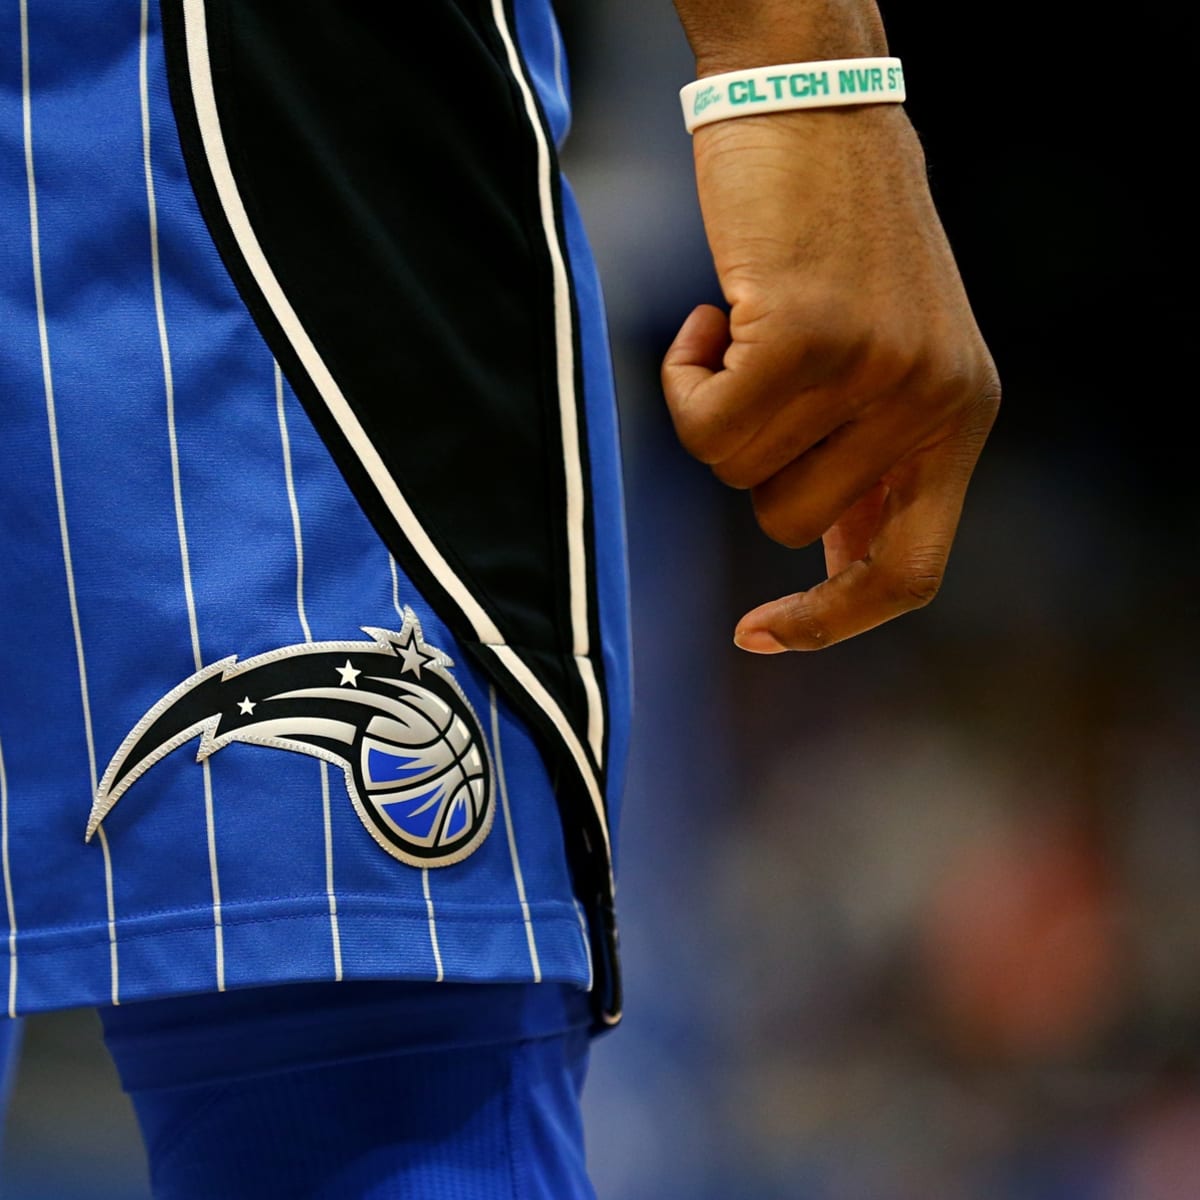 Orlando Magic unveil new uniform. Check it out and vote for your